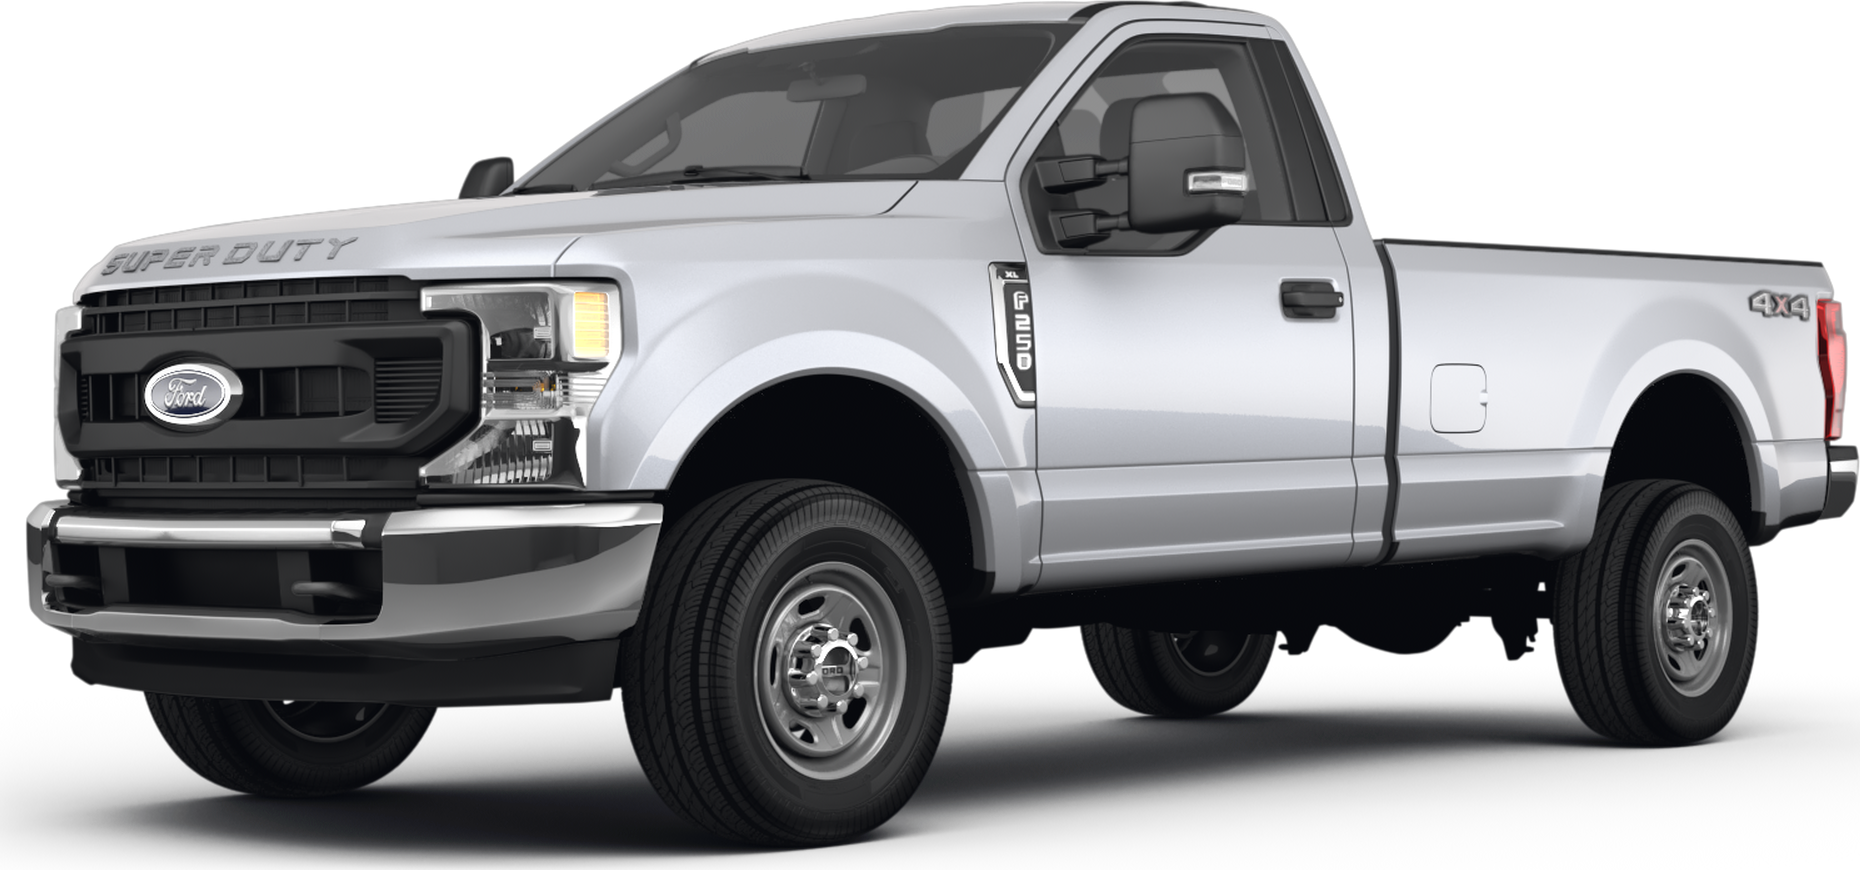 New 2023 Ford F250 Super Duty Regular Cab Reviews Pricing And Specs